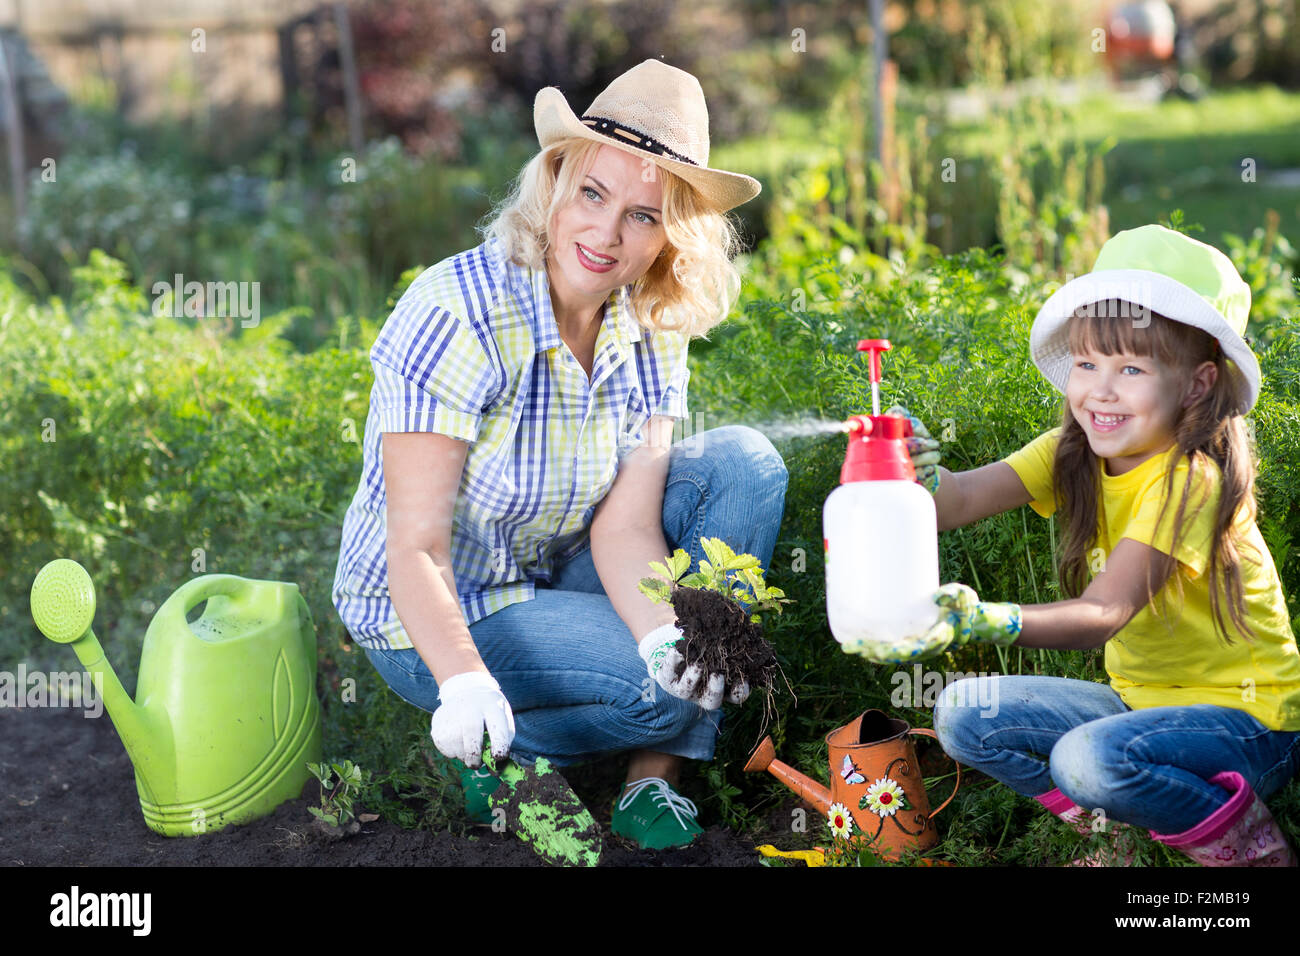 Happy woman and kid girl on farm garden in summer, planting strawberries. Happy family spending time together. Child helping mother. Stock Photo